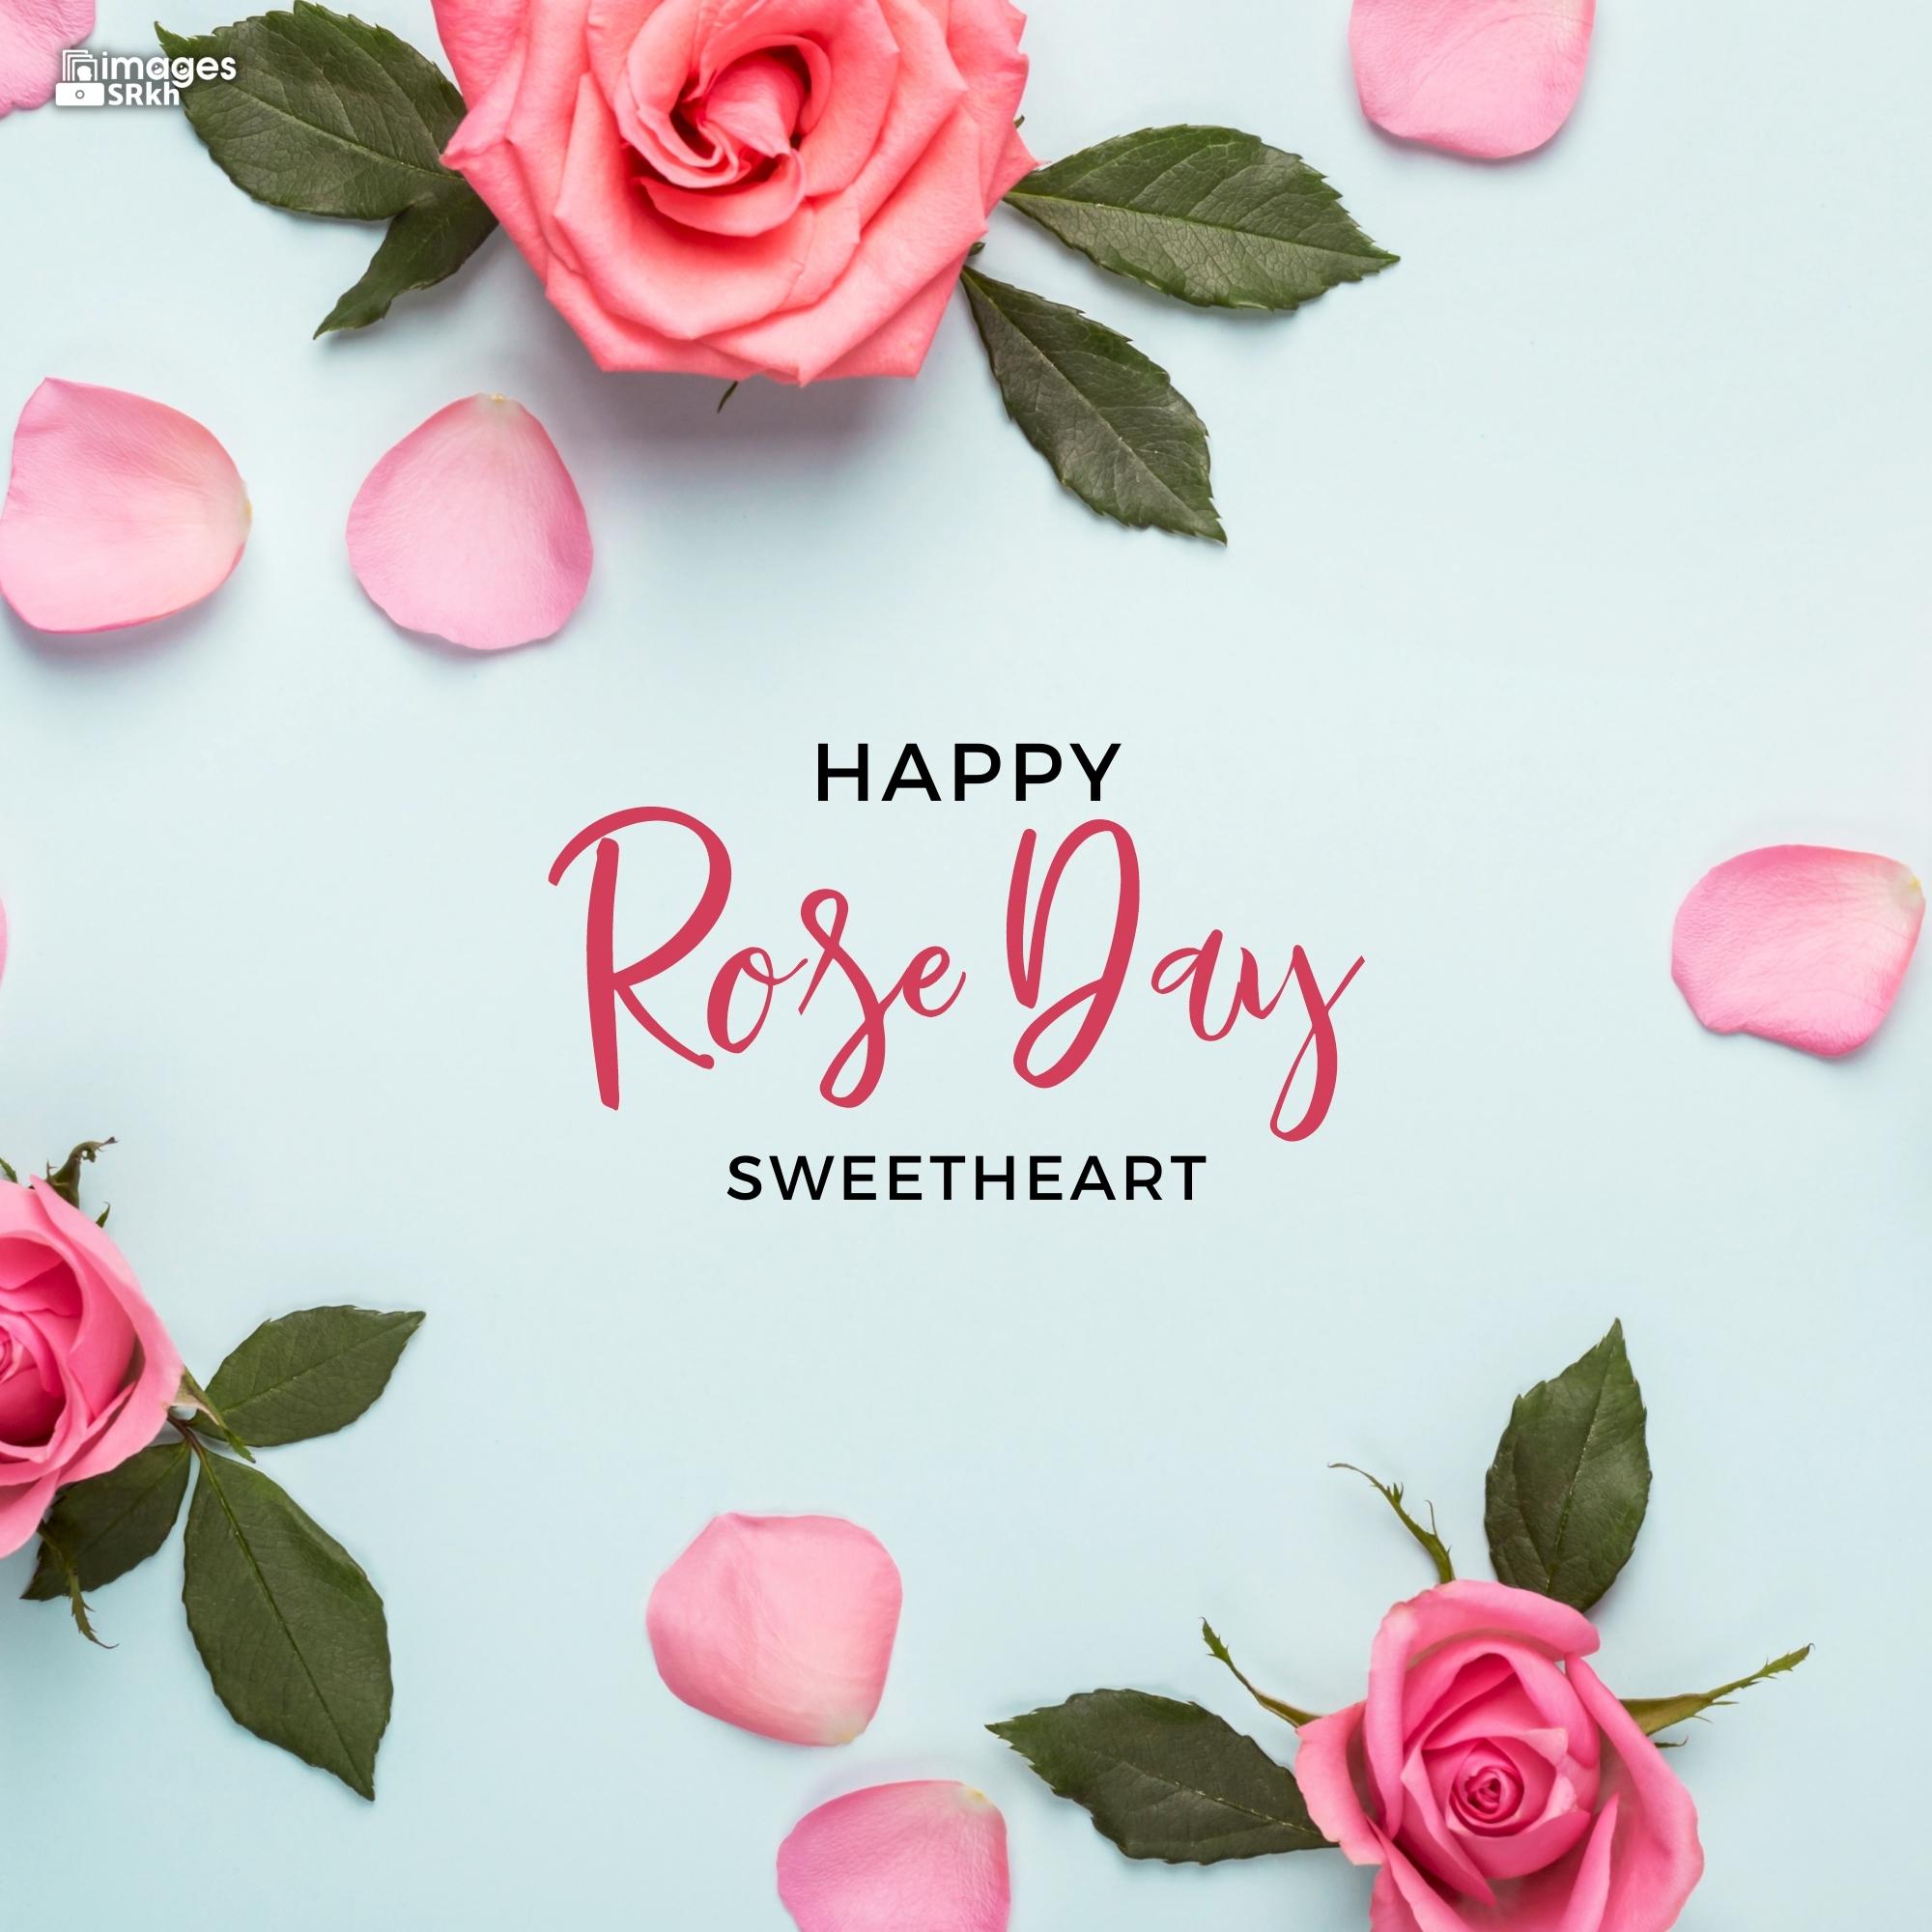 Happy Rose Day Image Hd Download (110)